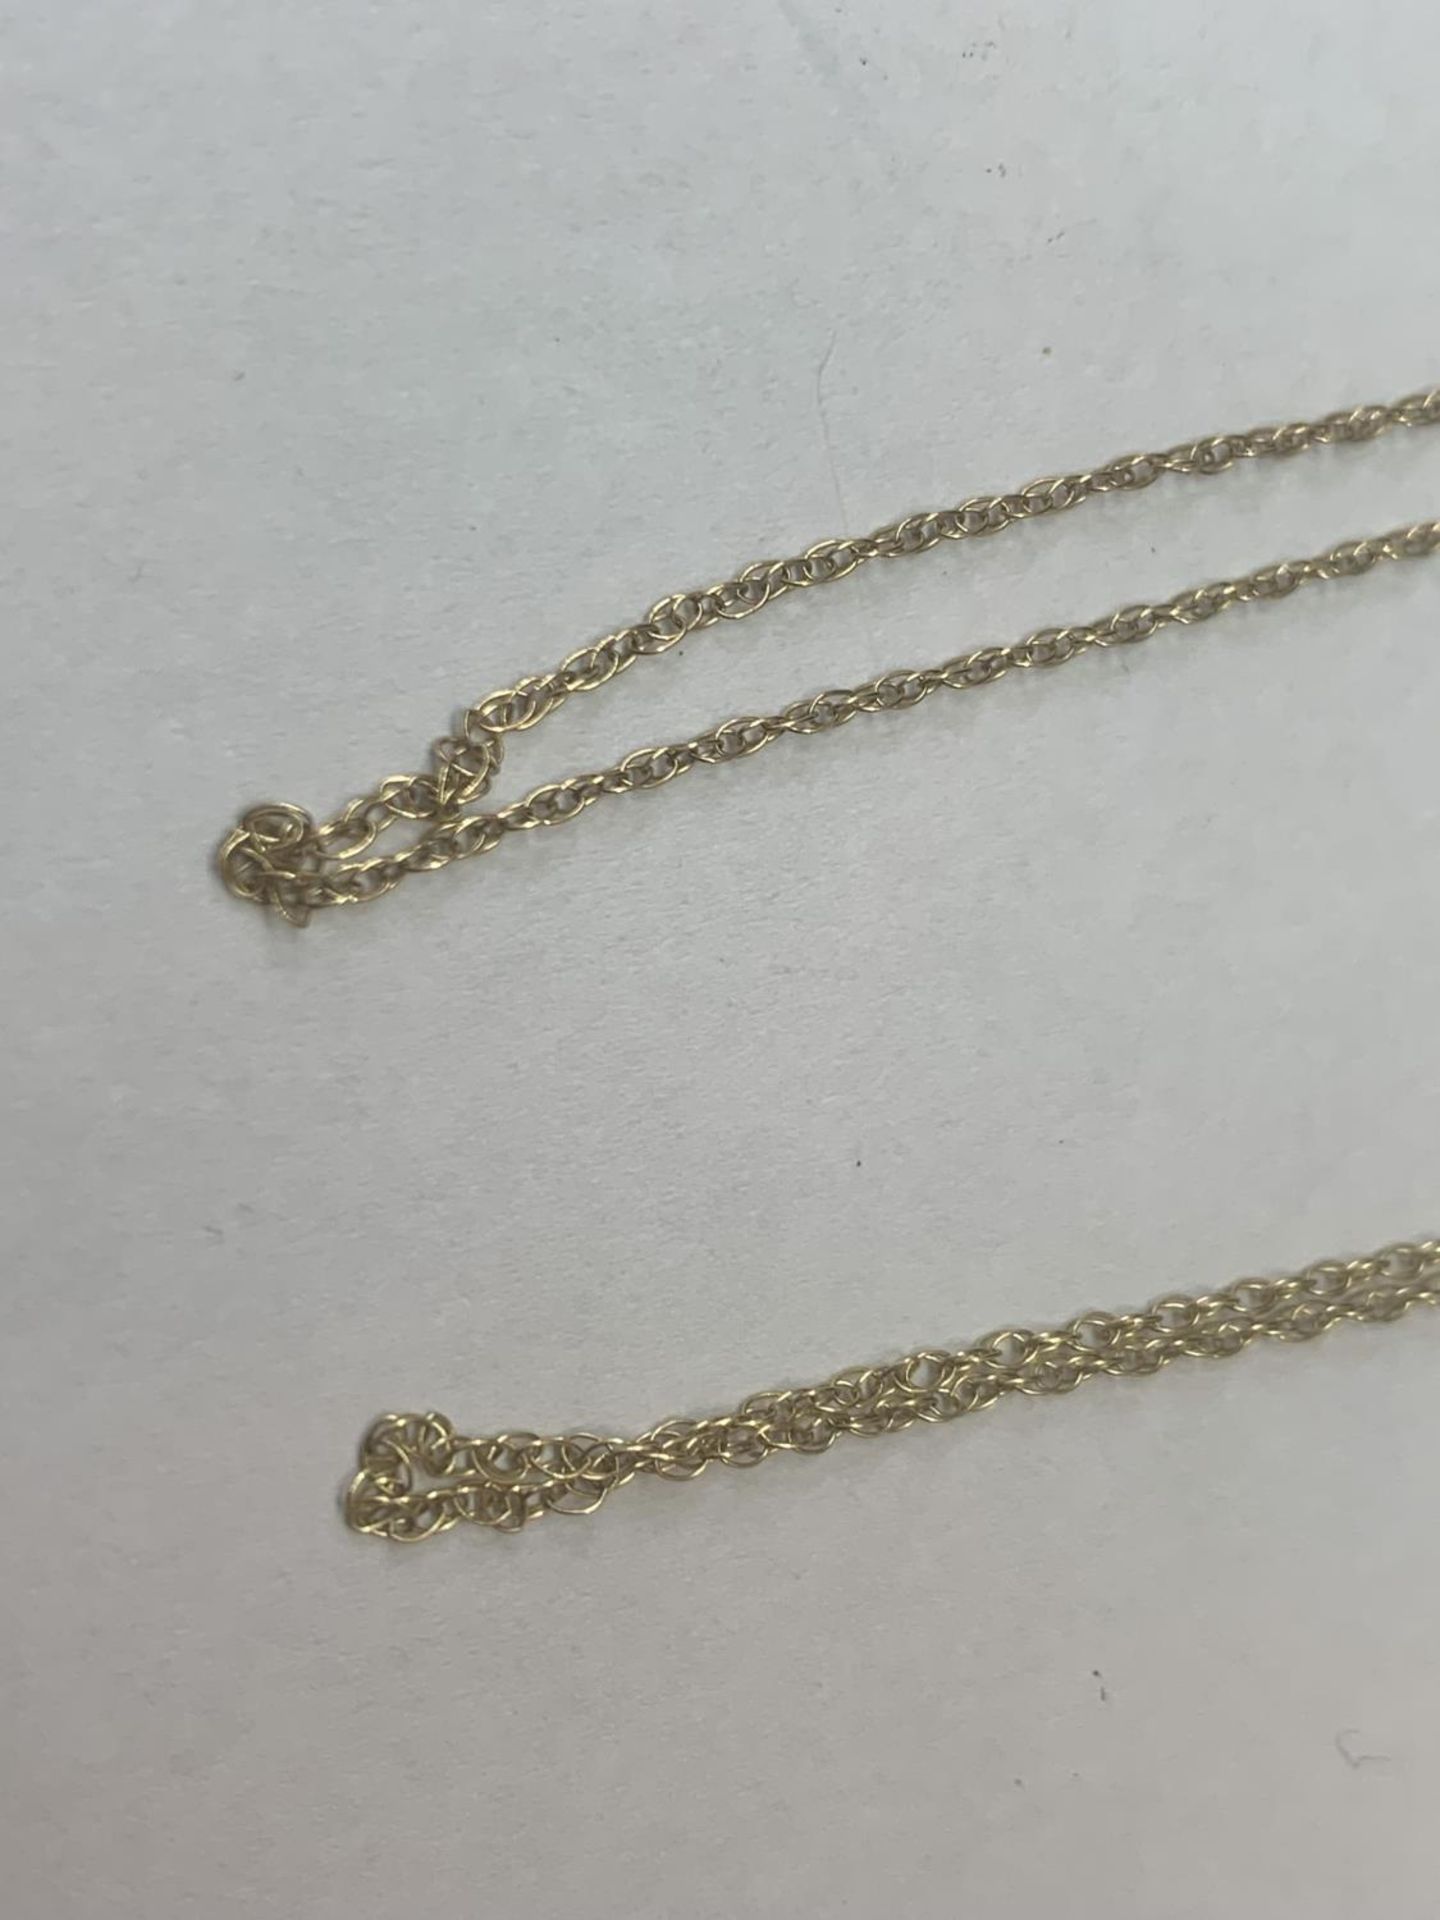 FOUR 9 CARAT GOLD NECKLACES GROSS WEIGHT 2.6 GRAMS - Image 3 of 3